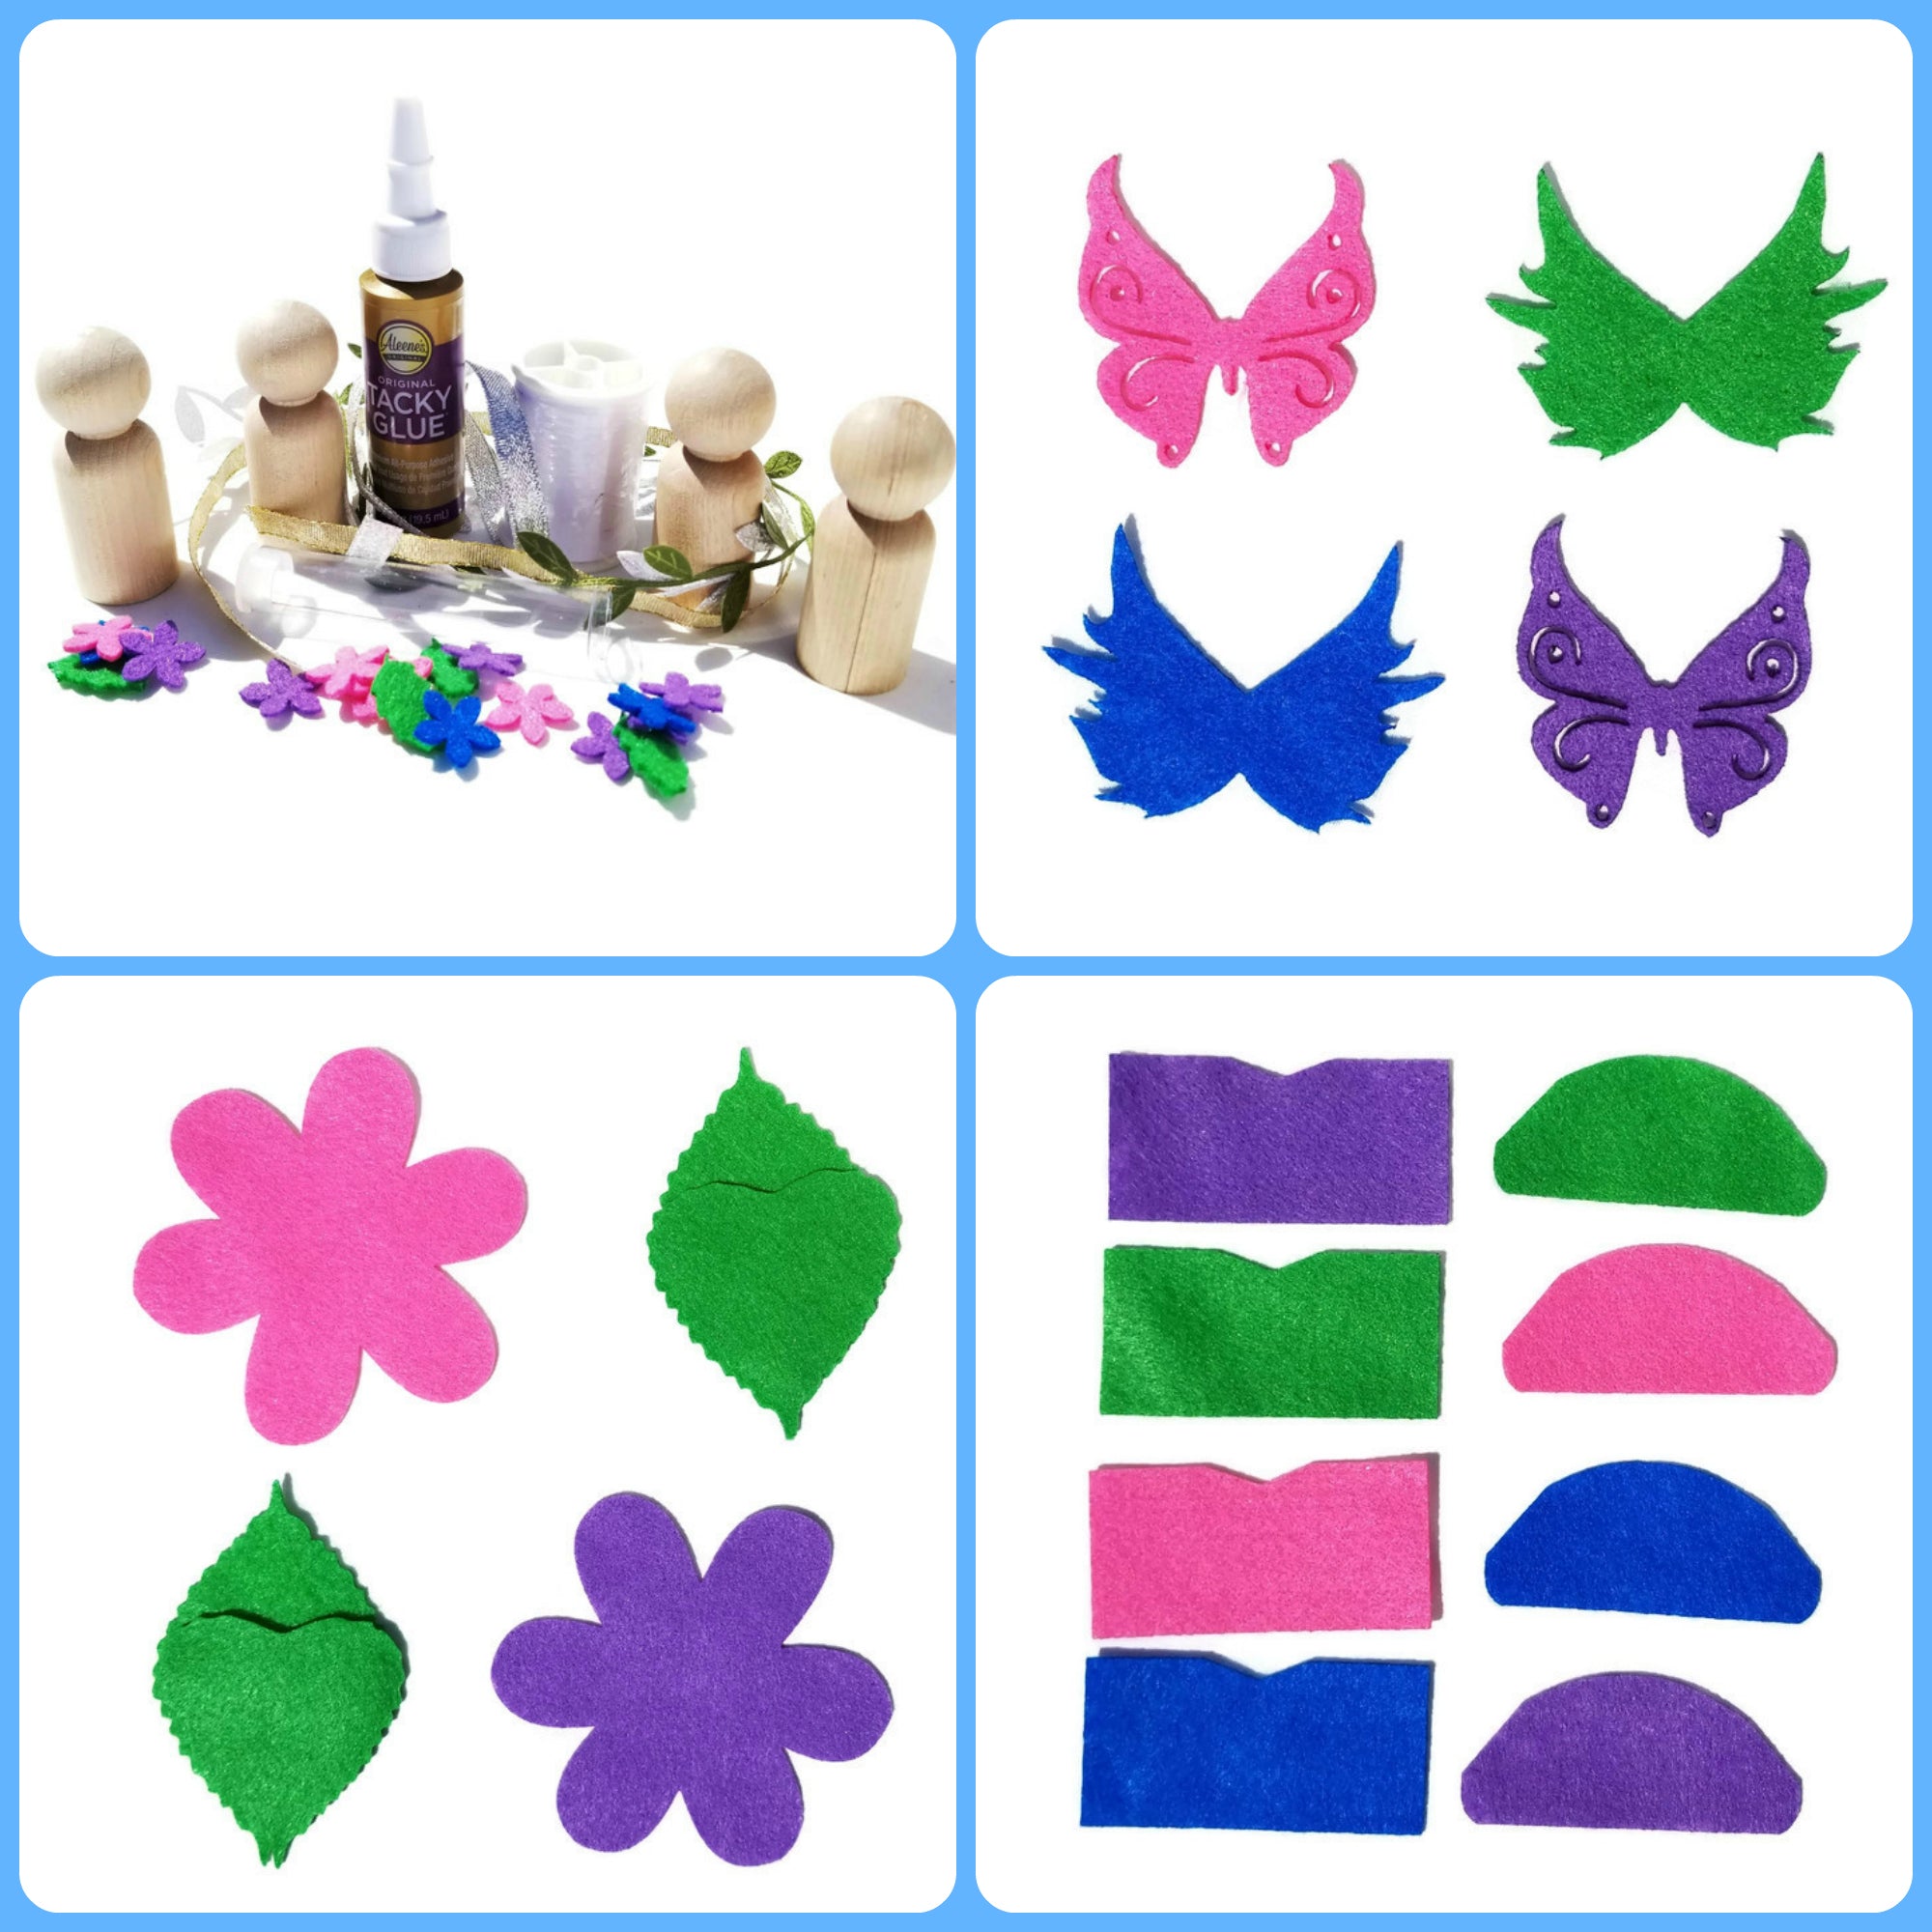 Fairy Doll Making Kit – ToysCentral - Europe